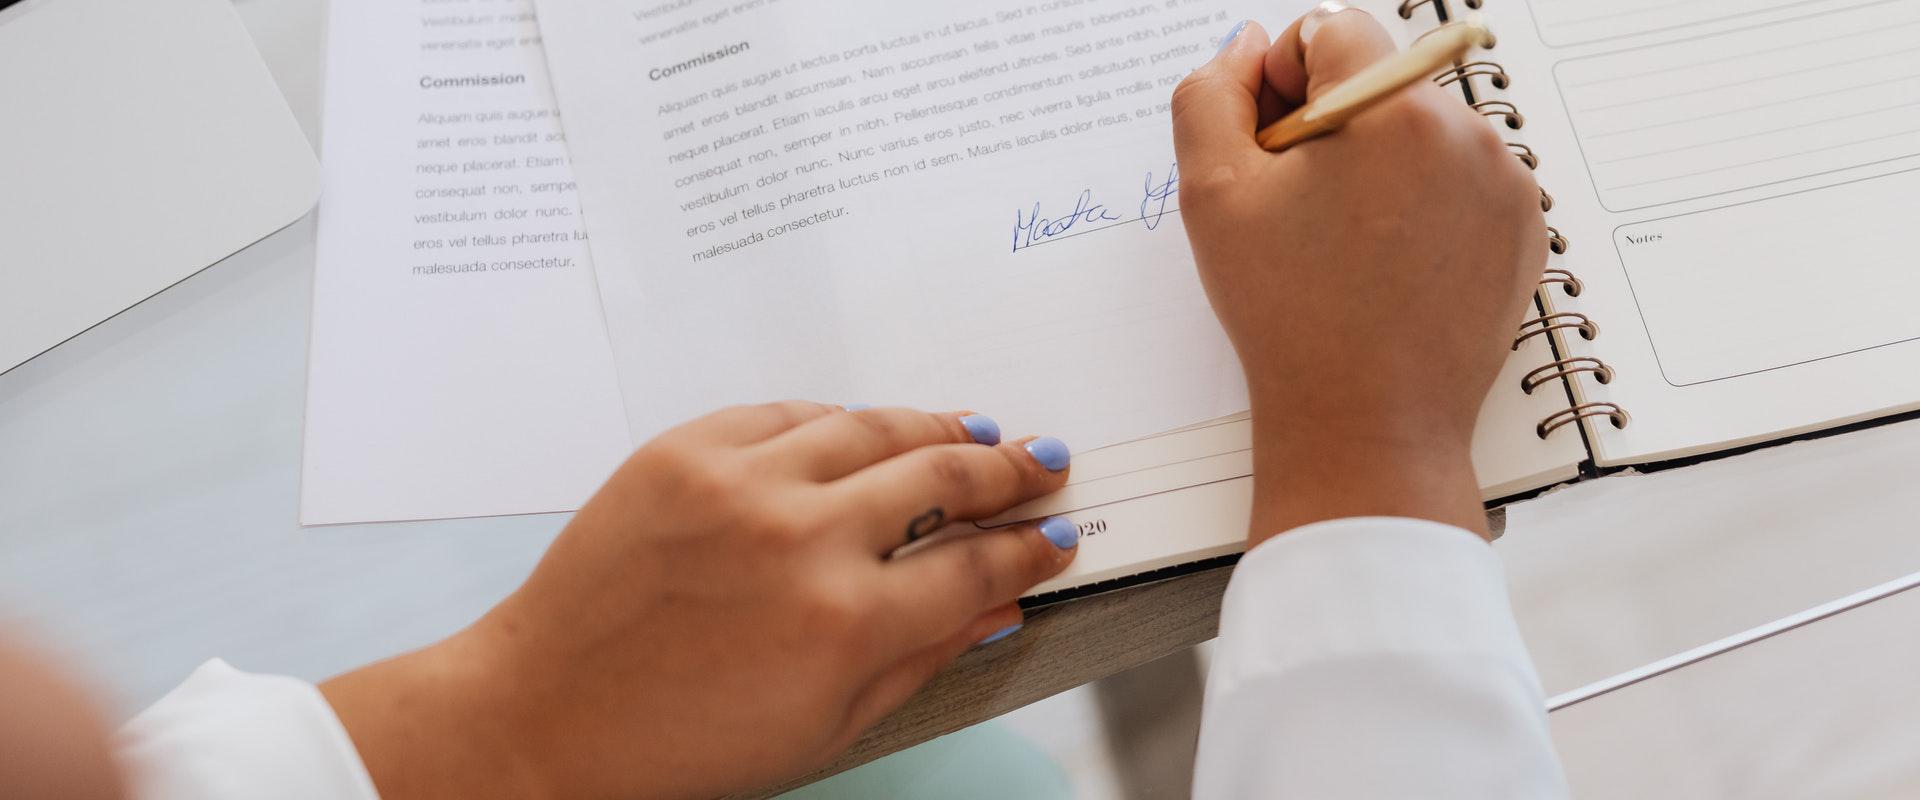 Can your signature be anything? And what kinds of signatures are valid? This article will answer these and other relevant questions.